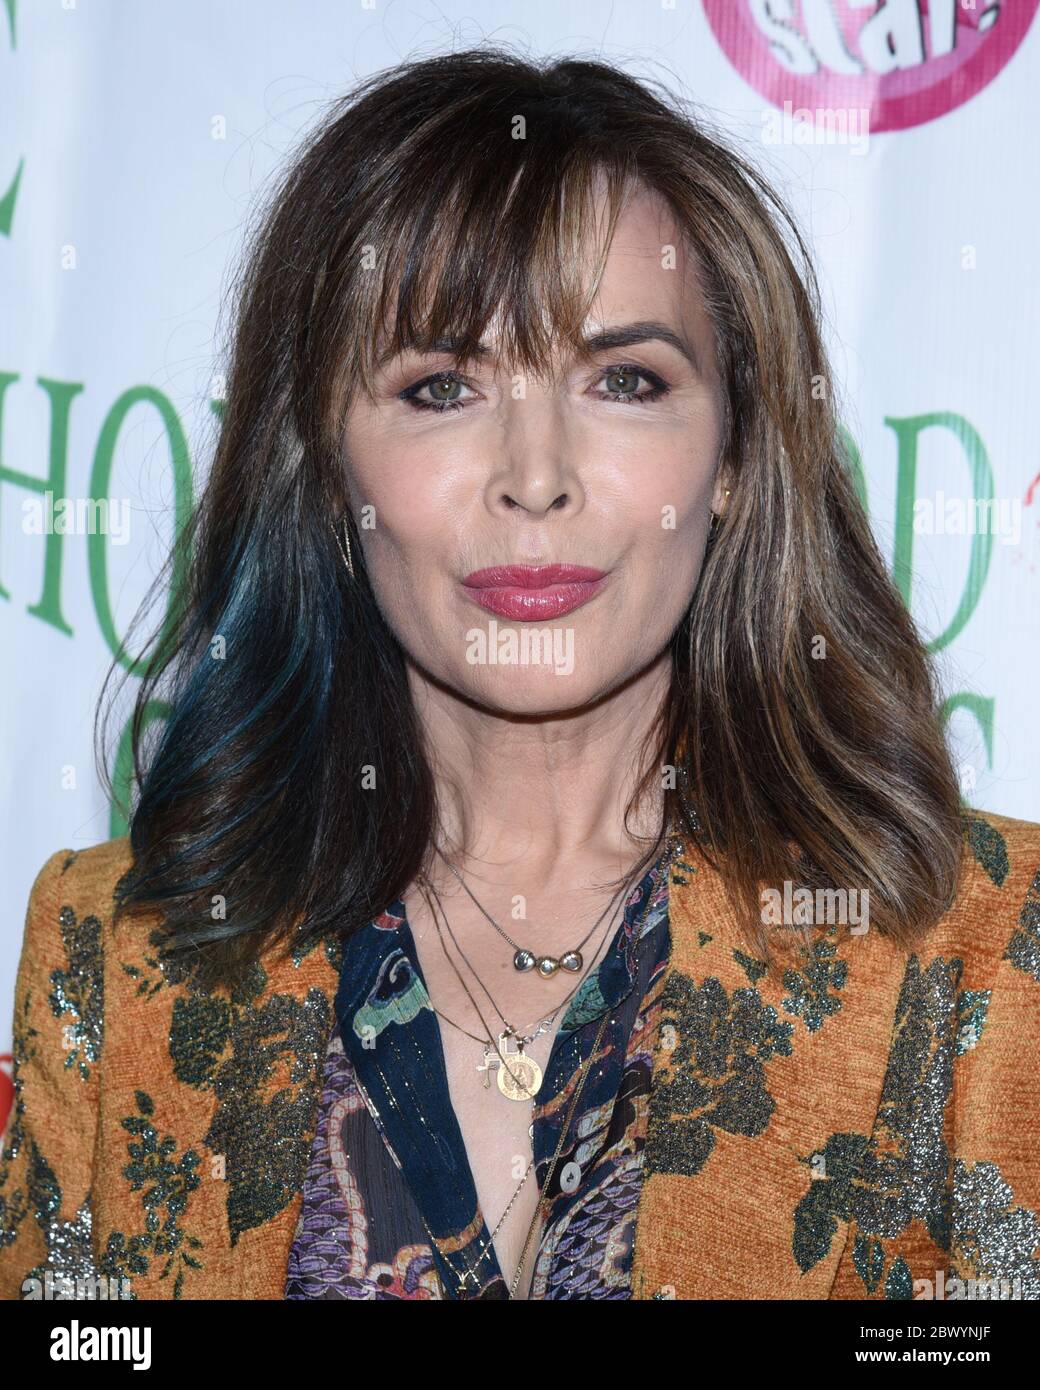 November 25, 2018, Los Angeles, California, USA: Lauren Koslow arrives at the 87th Annual Hollywood Christmas Parade in Hollywood California on November 25, 2018. (Credit Image: © Billy Bennight/ZUMA Wire) Stock Photo